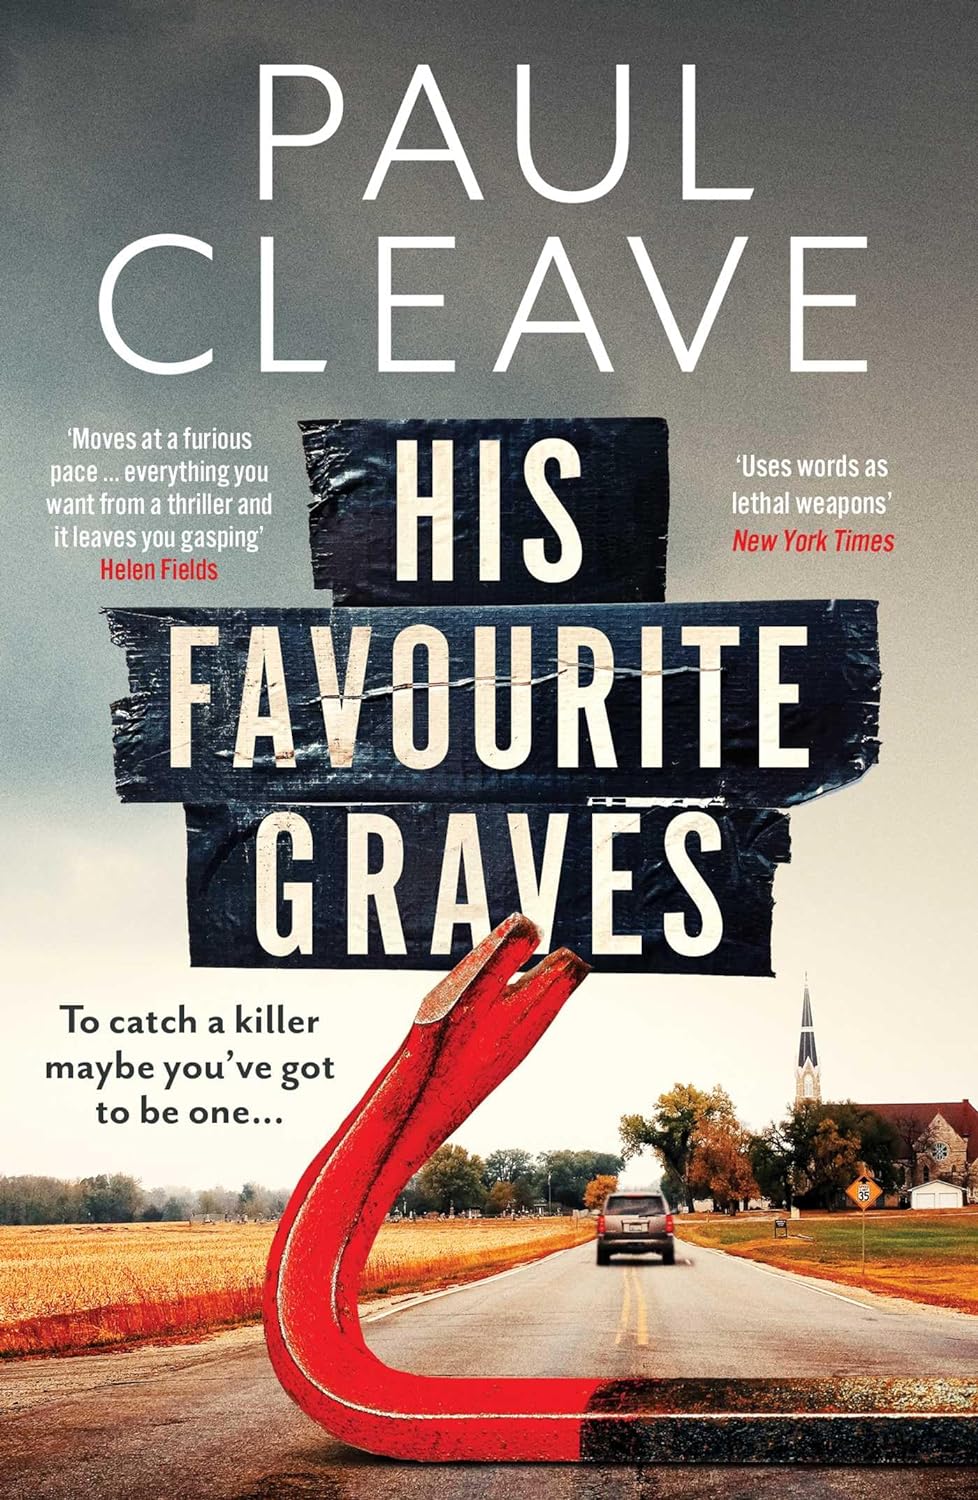 My #BookReview of #HisFavouriteGraves by #PaulCleave @PaulCleave published by @OrendaBooks #Orendabooks